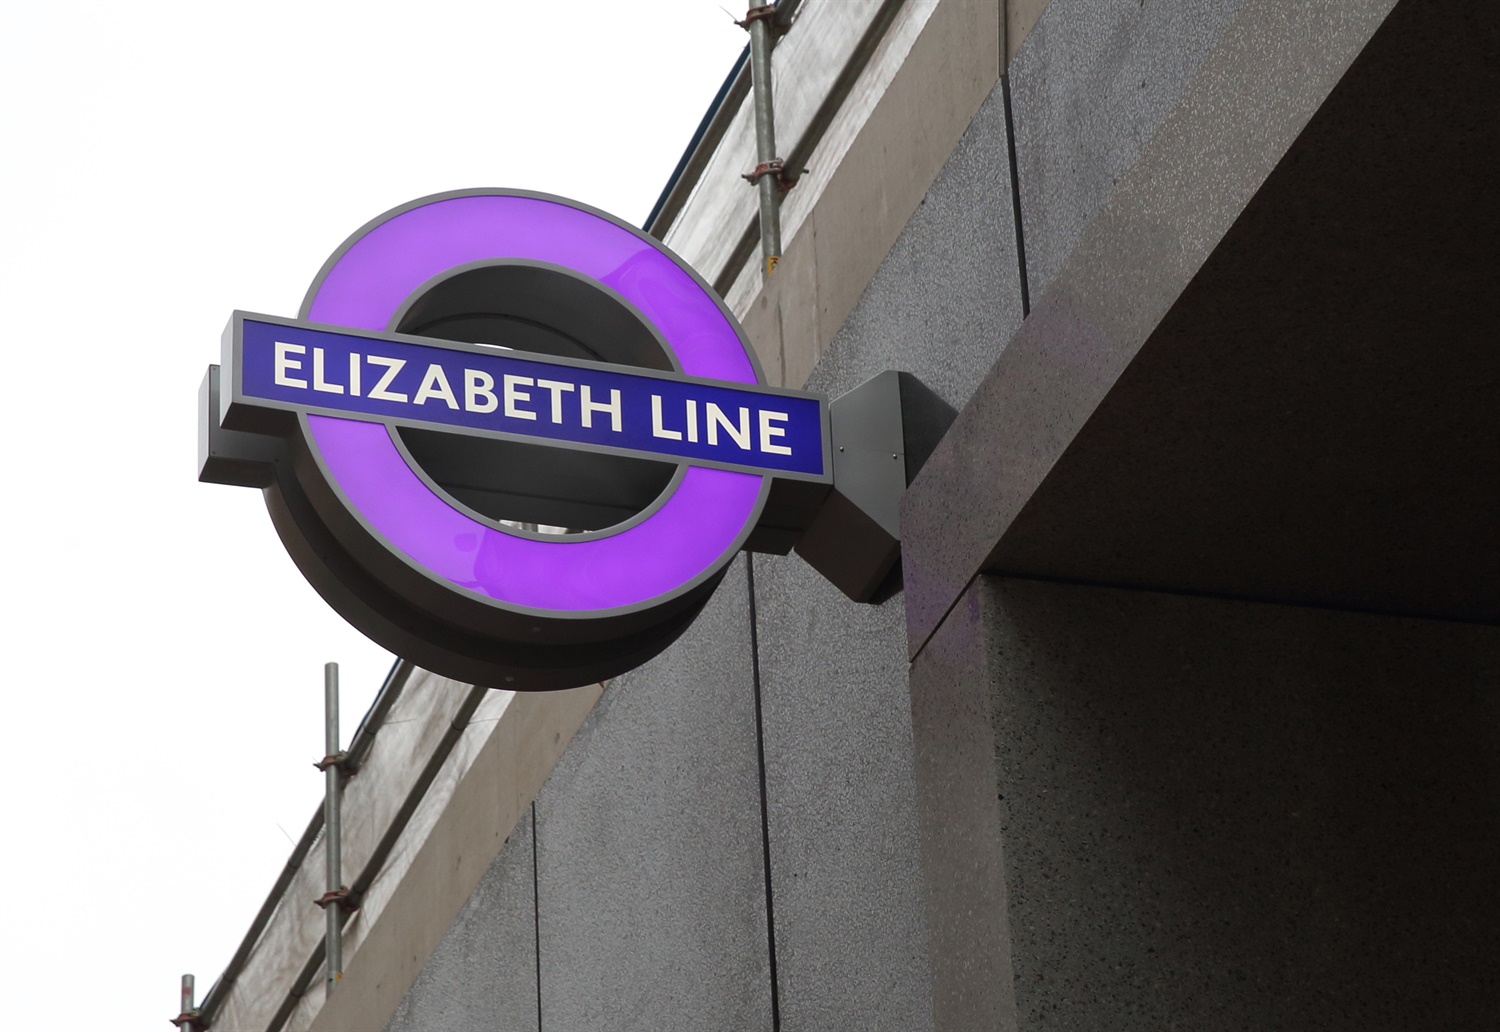 TfL installs first ‘iconic’ purple roundels ahead of historic Elizabeth Line opening